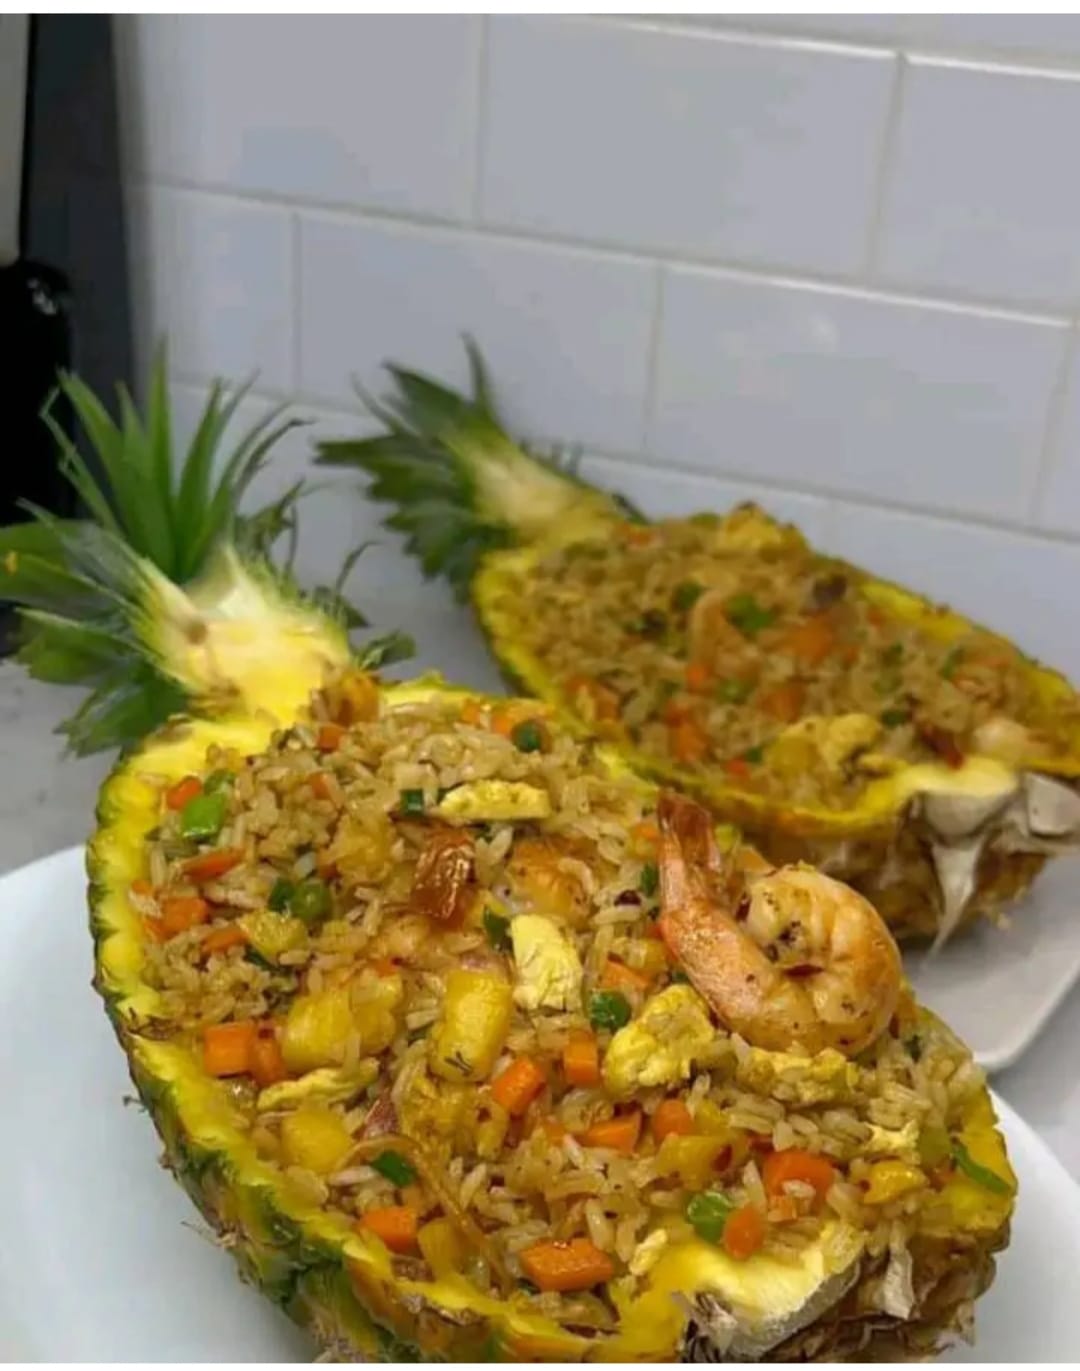 HOW TO MAKE PINEAPPLE FRIED RICE